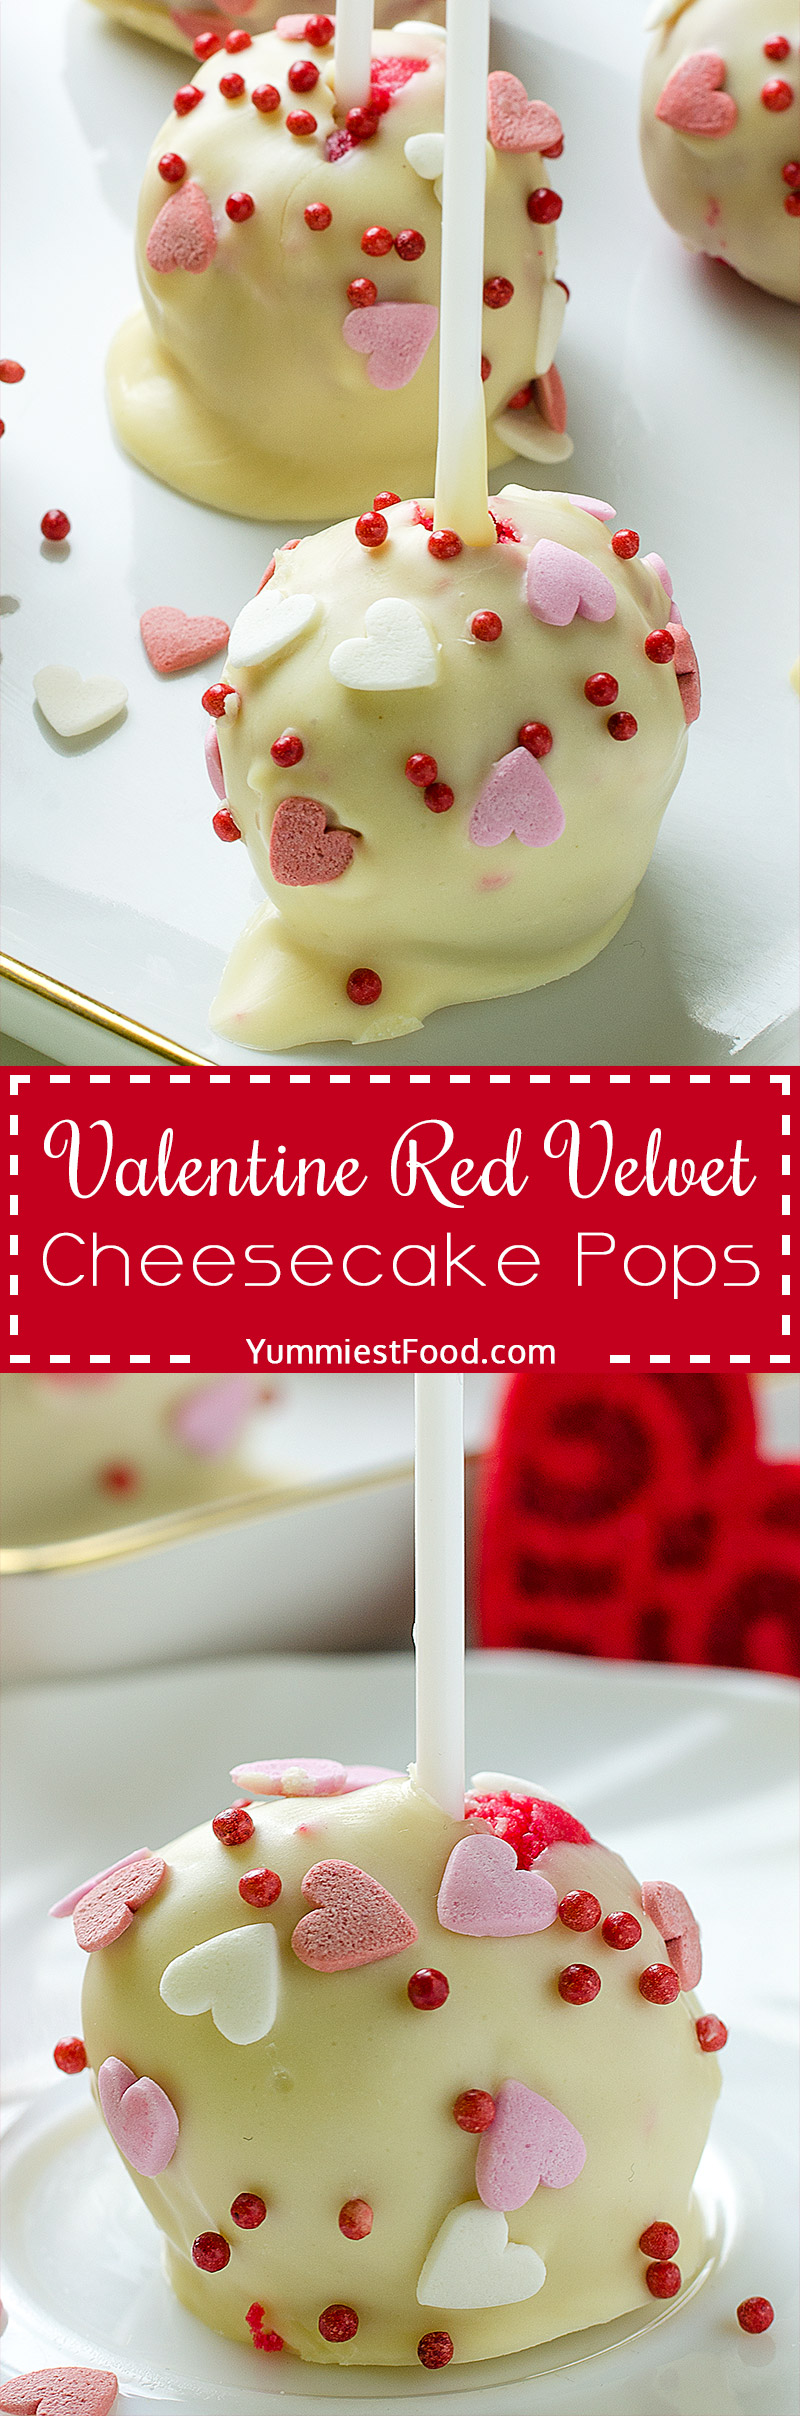 The most delicious Red Velvet Cheesecake Pops recipe ever. Perfect dessert for Valentine’s Day.